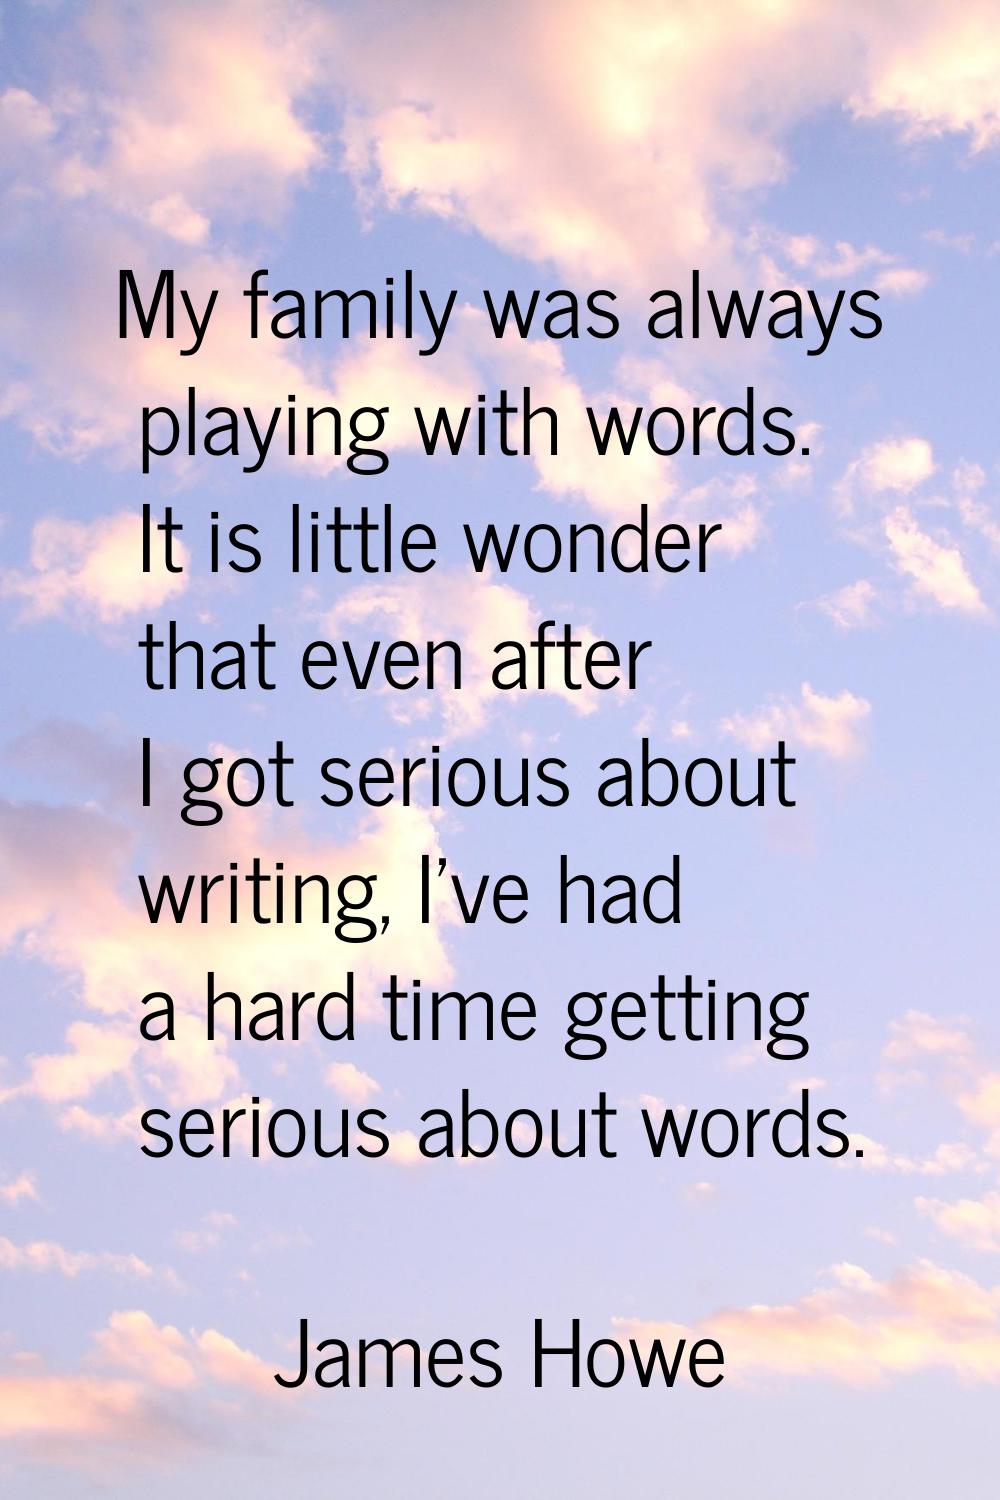 My family was always playing with words. It is little wonder that even after I got serious about wr